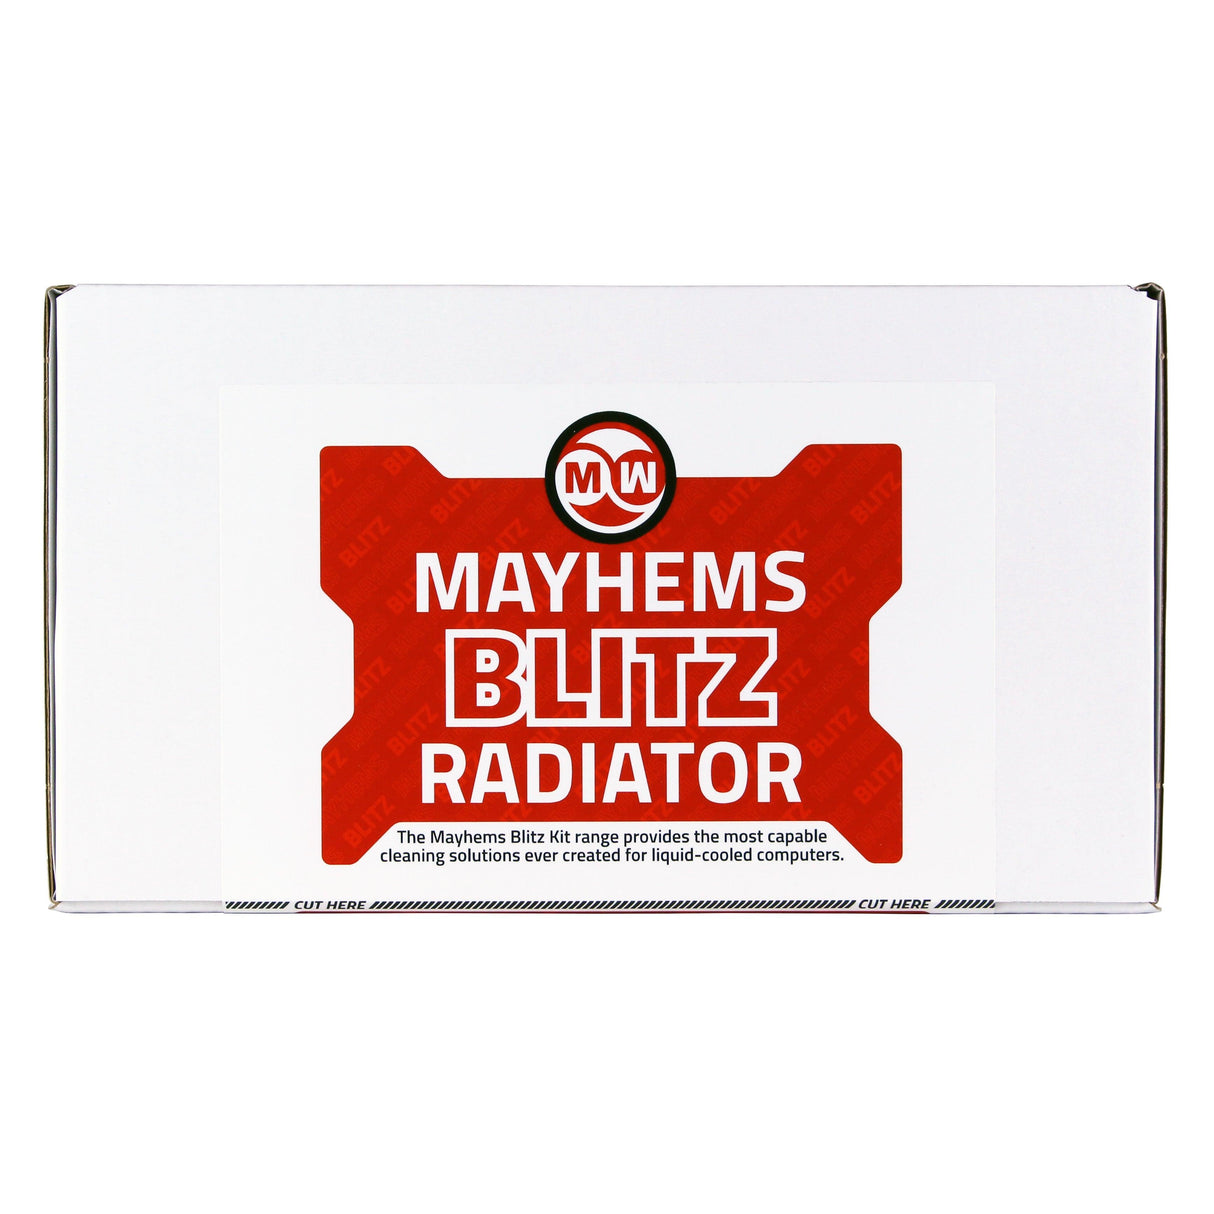 Mayhems - PC Cleaning Kit - Blitz Radiator - Radiator Cleaning, For Initial Setup and Coolant Change - Digital Outpost LLC